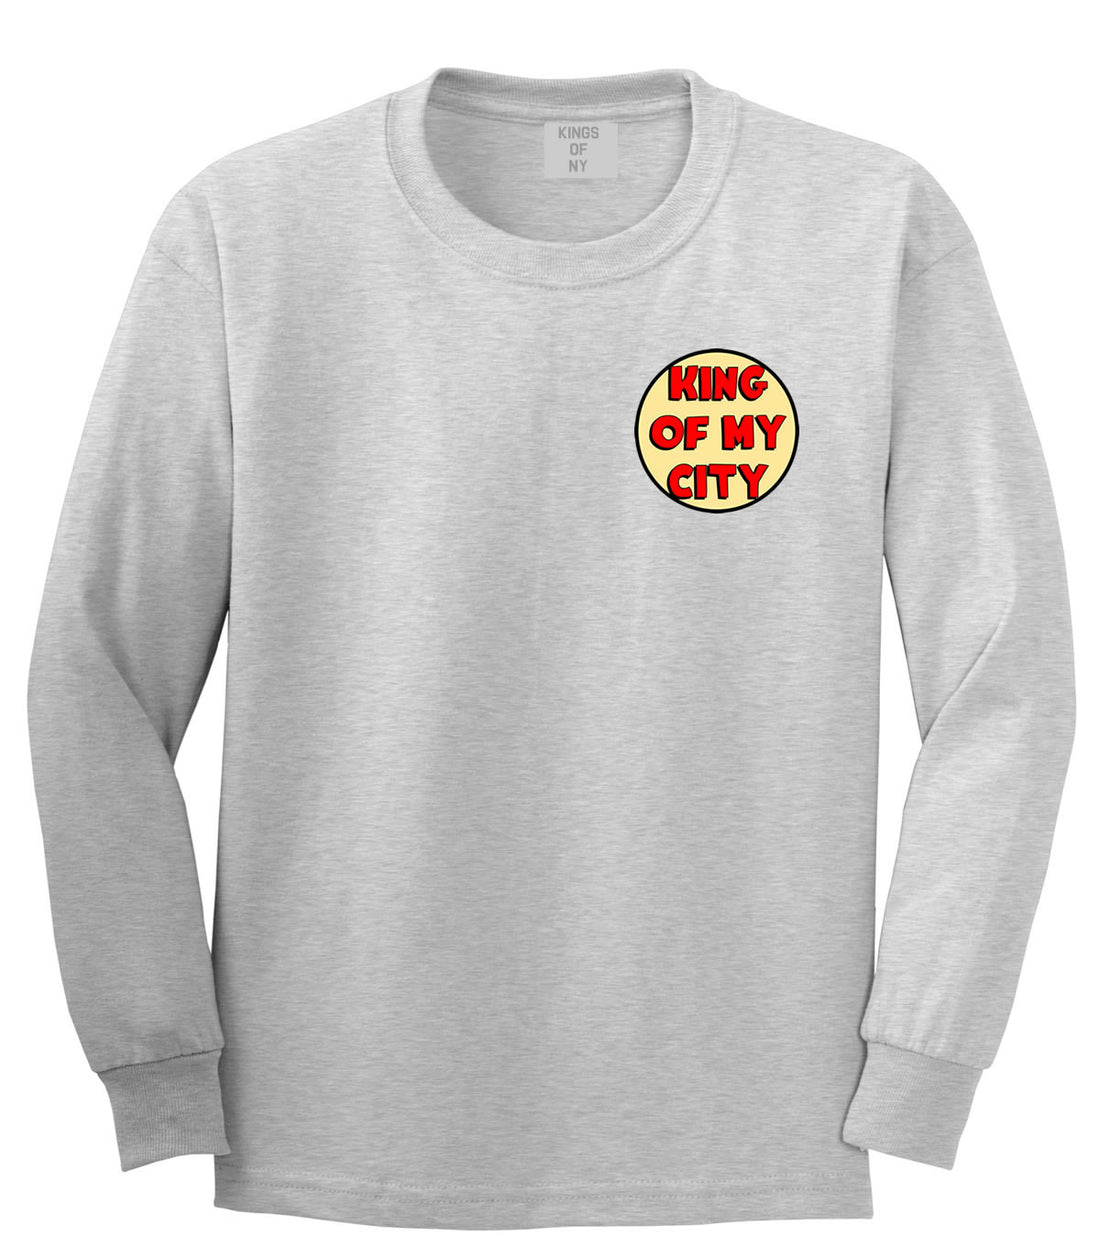 King Of My City Chest Logo Boys Kids Long Sleeve T-Shirt in Grey by Kings Of NY